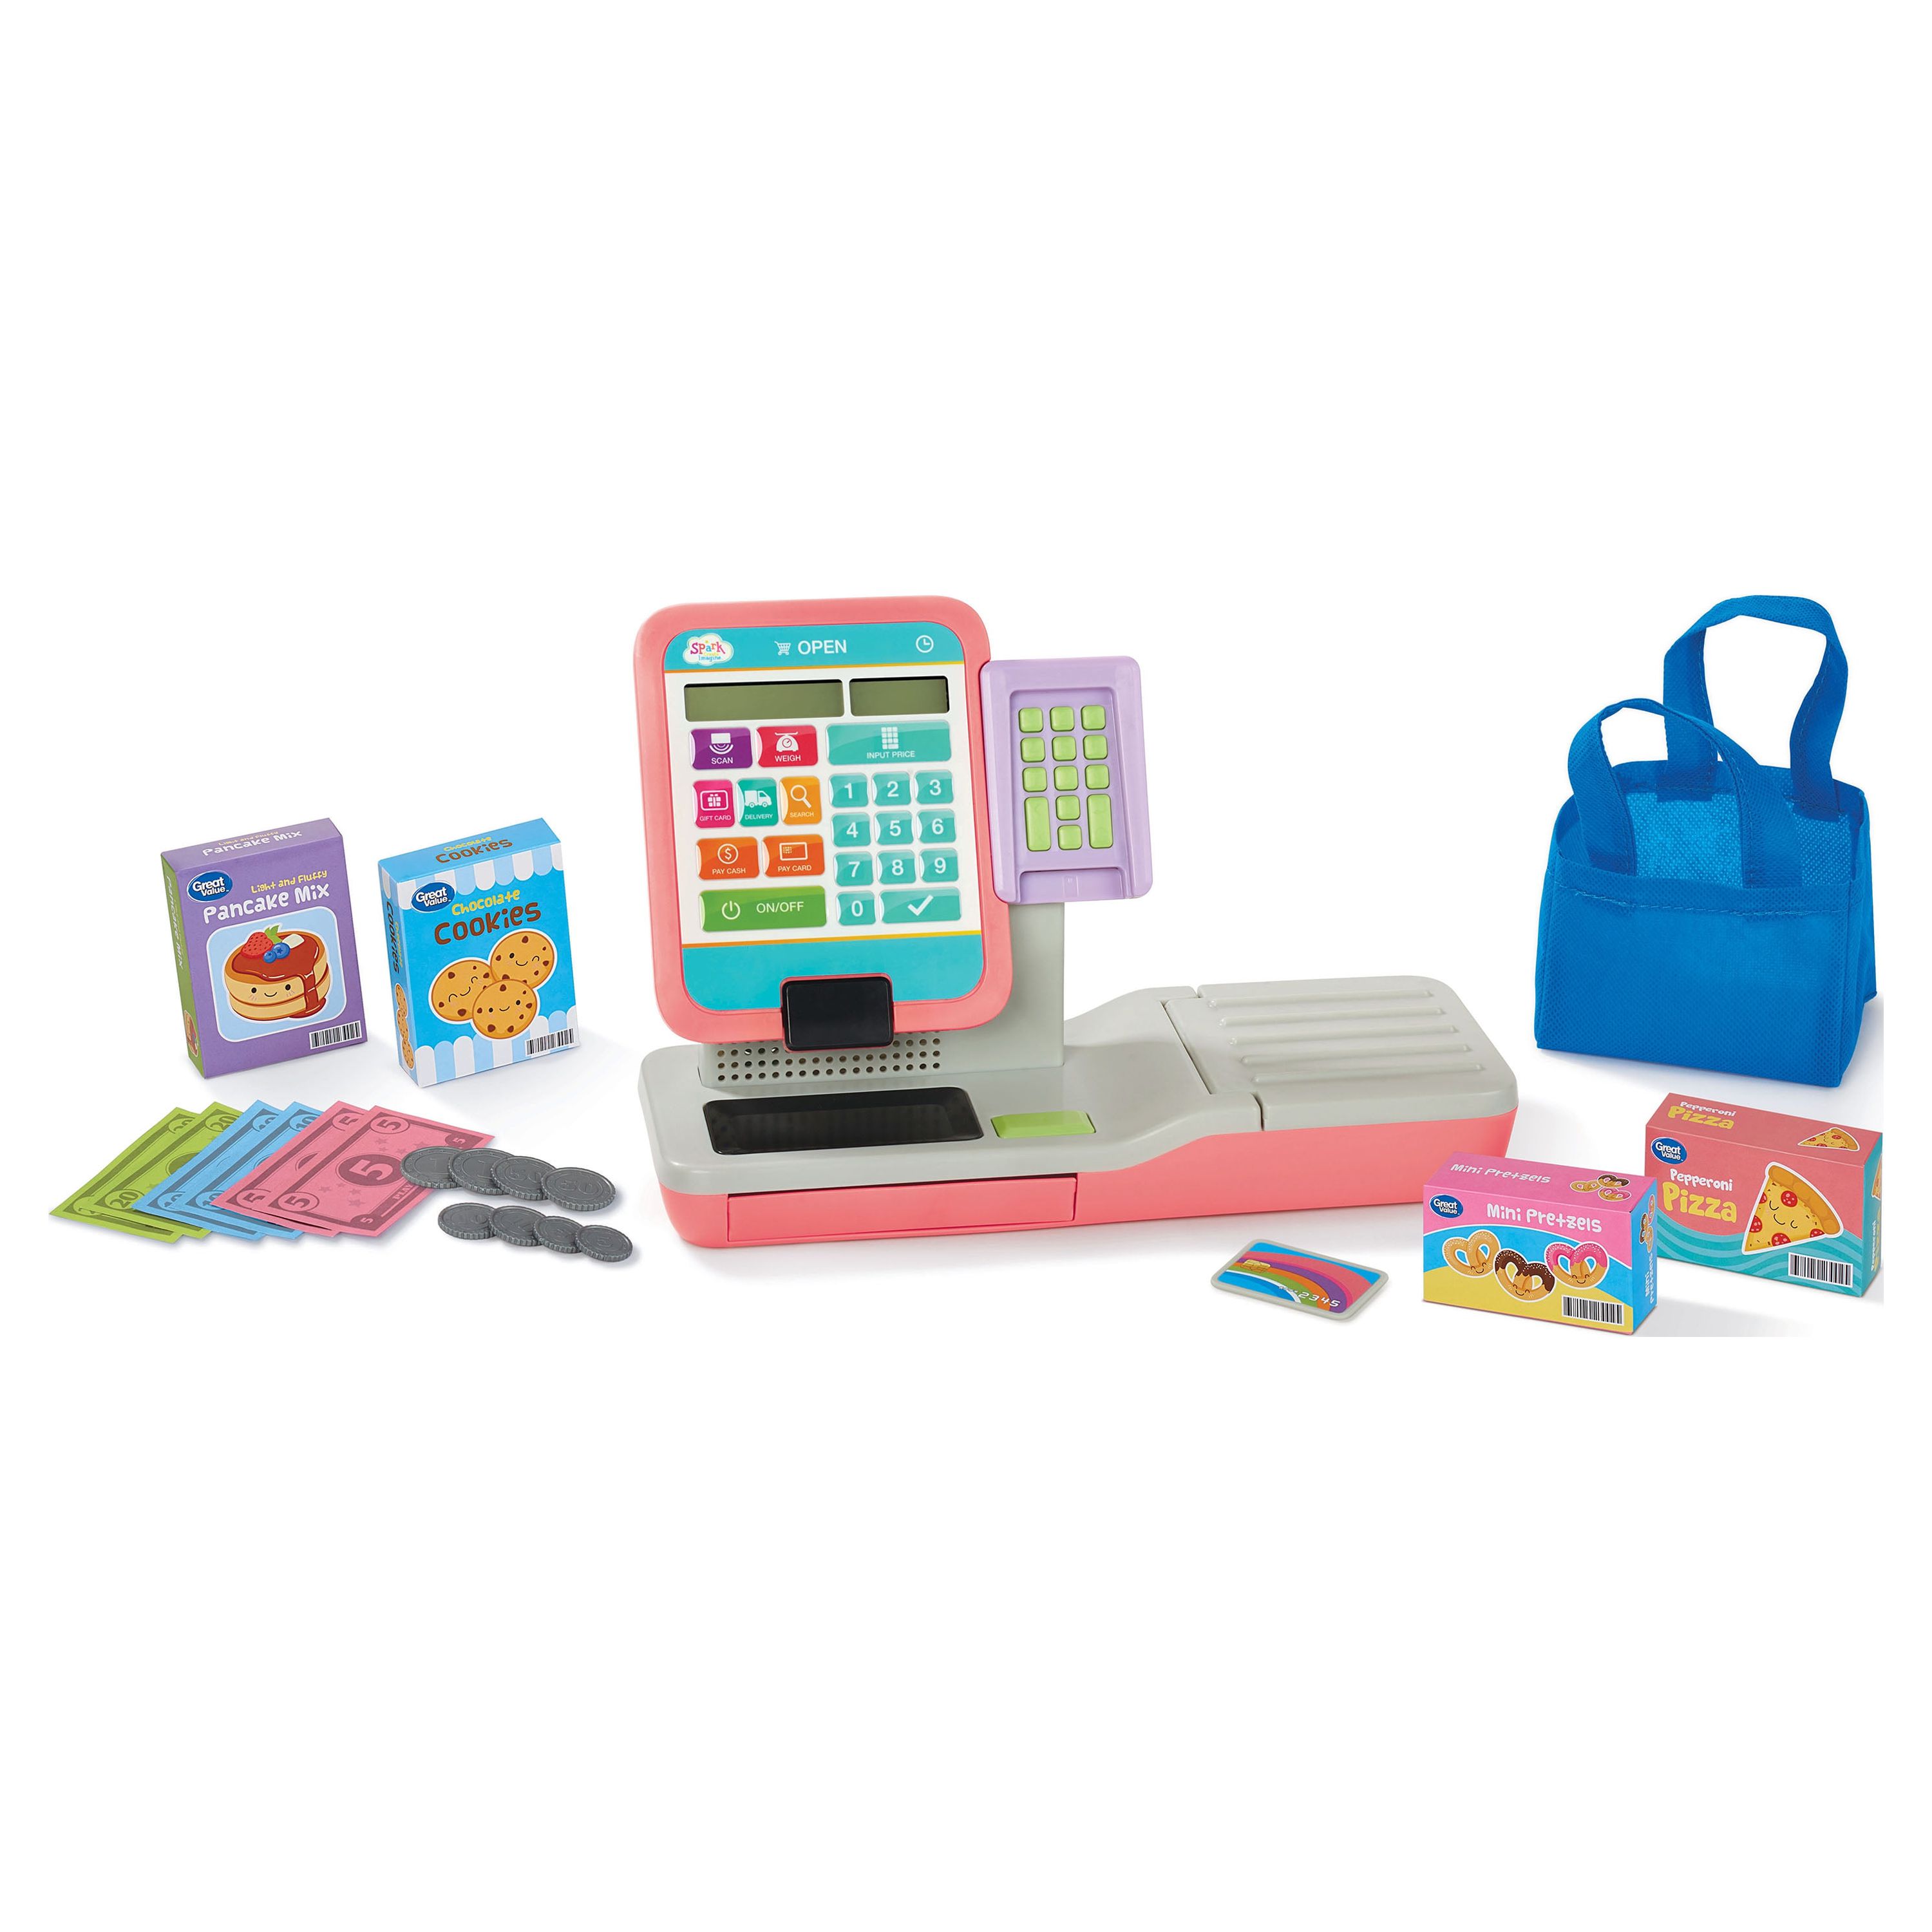 Spark Create Imagine Check Out Station Play Cash Register with Play Money, 21 Pieces - image 1 of 6